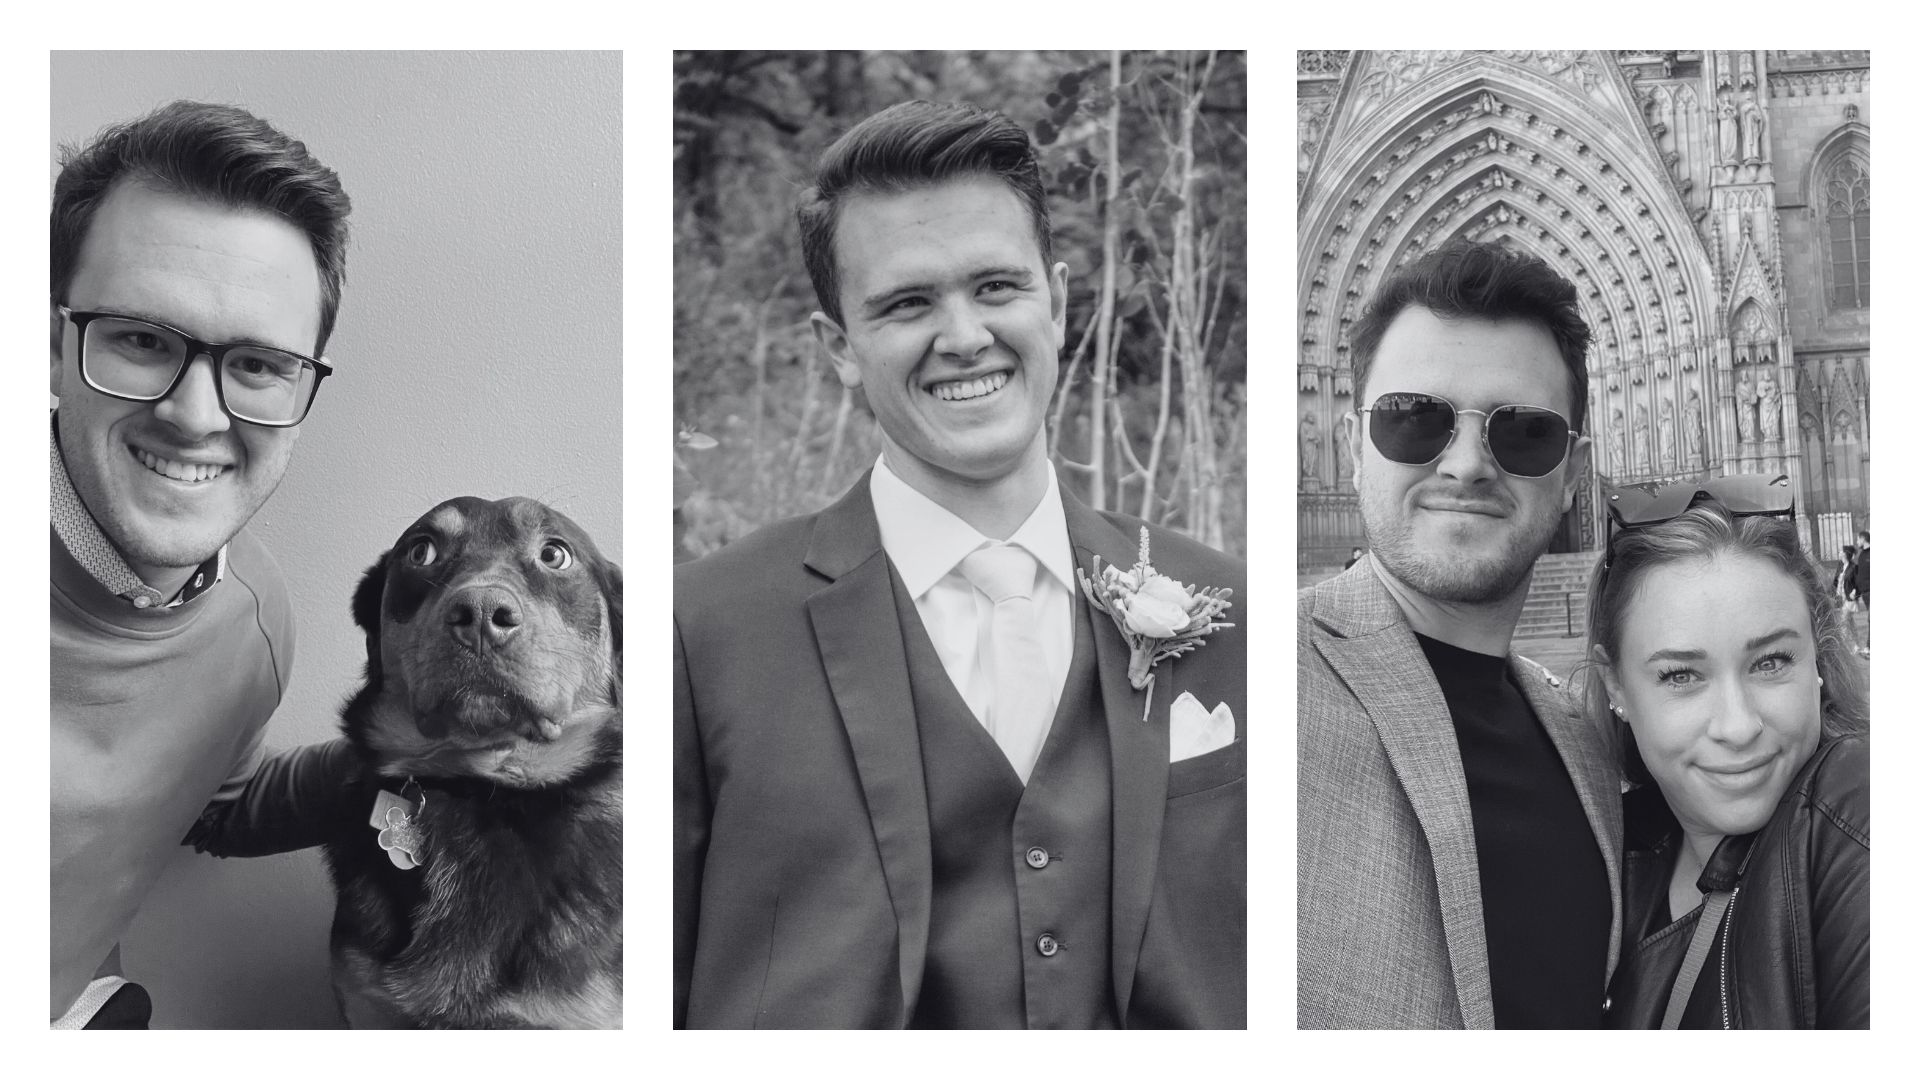 Three black and white photos of the author, Tim Pate, his dog, and his wife.